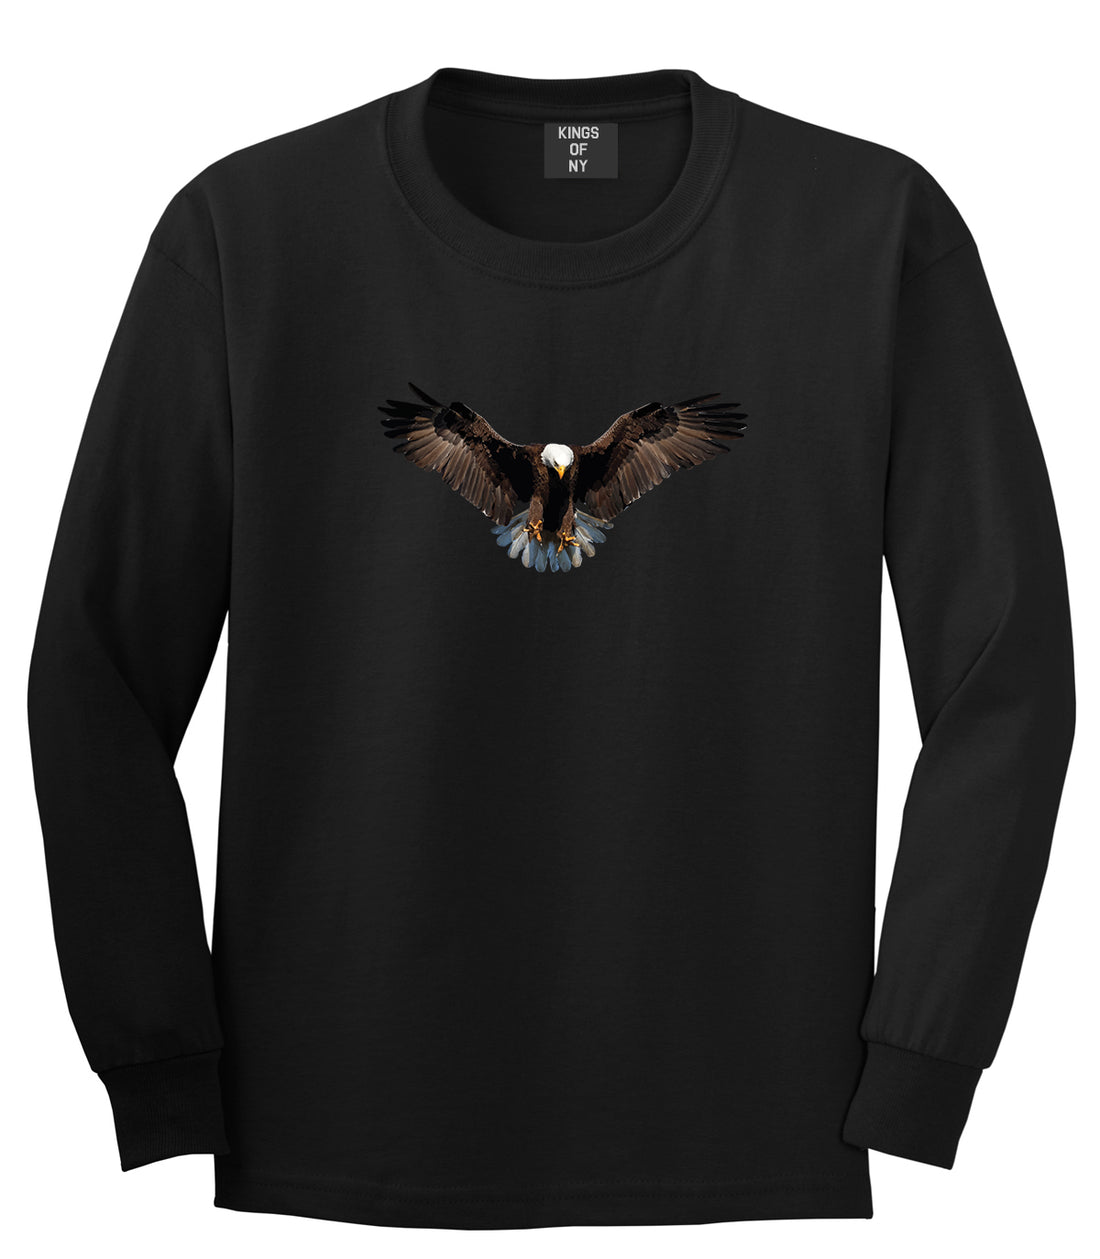 Bald Eagle Wings Spread Black Long Sleeve T-Shirt by Kings Of NY